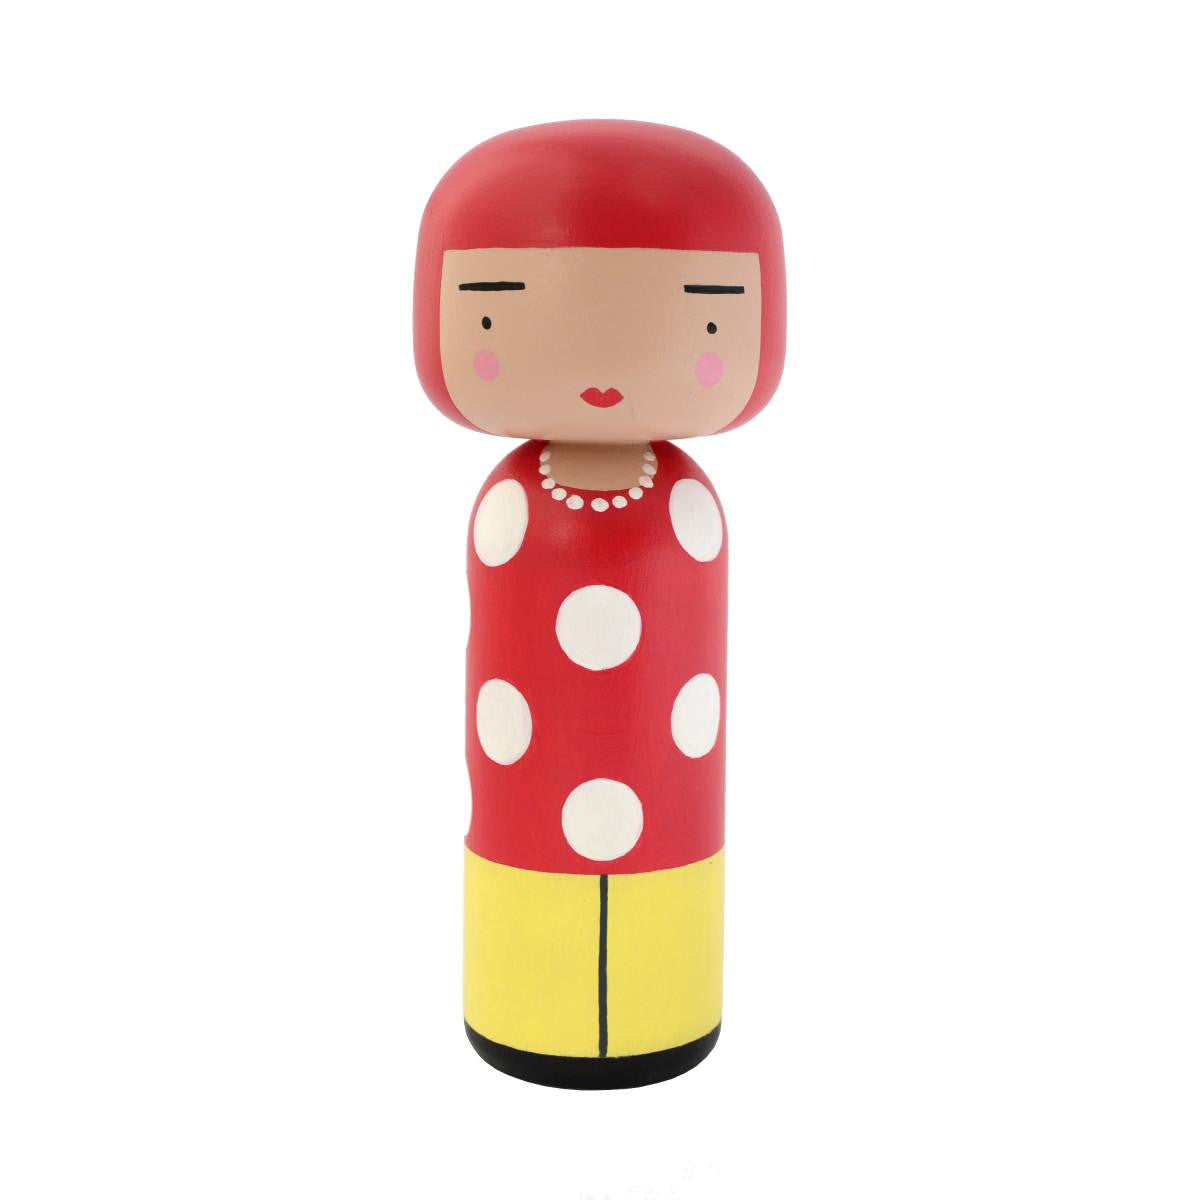 Kokeshi Doll by Sketch.Inc for Lucie Kaas Dot